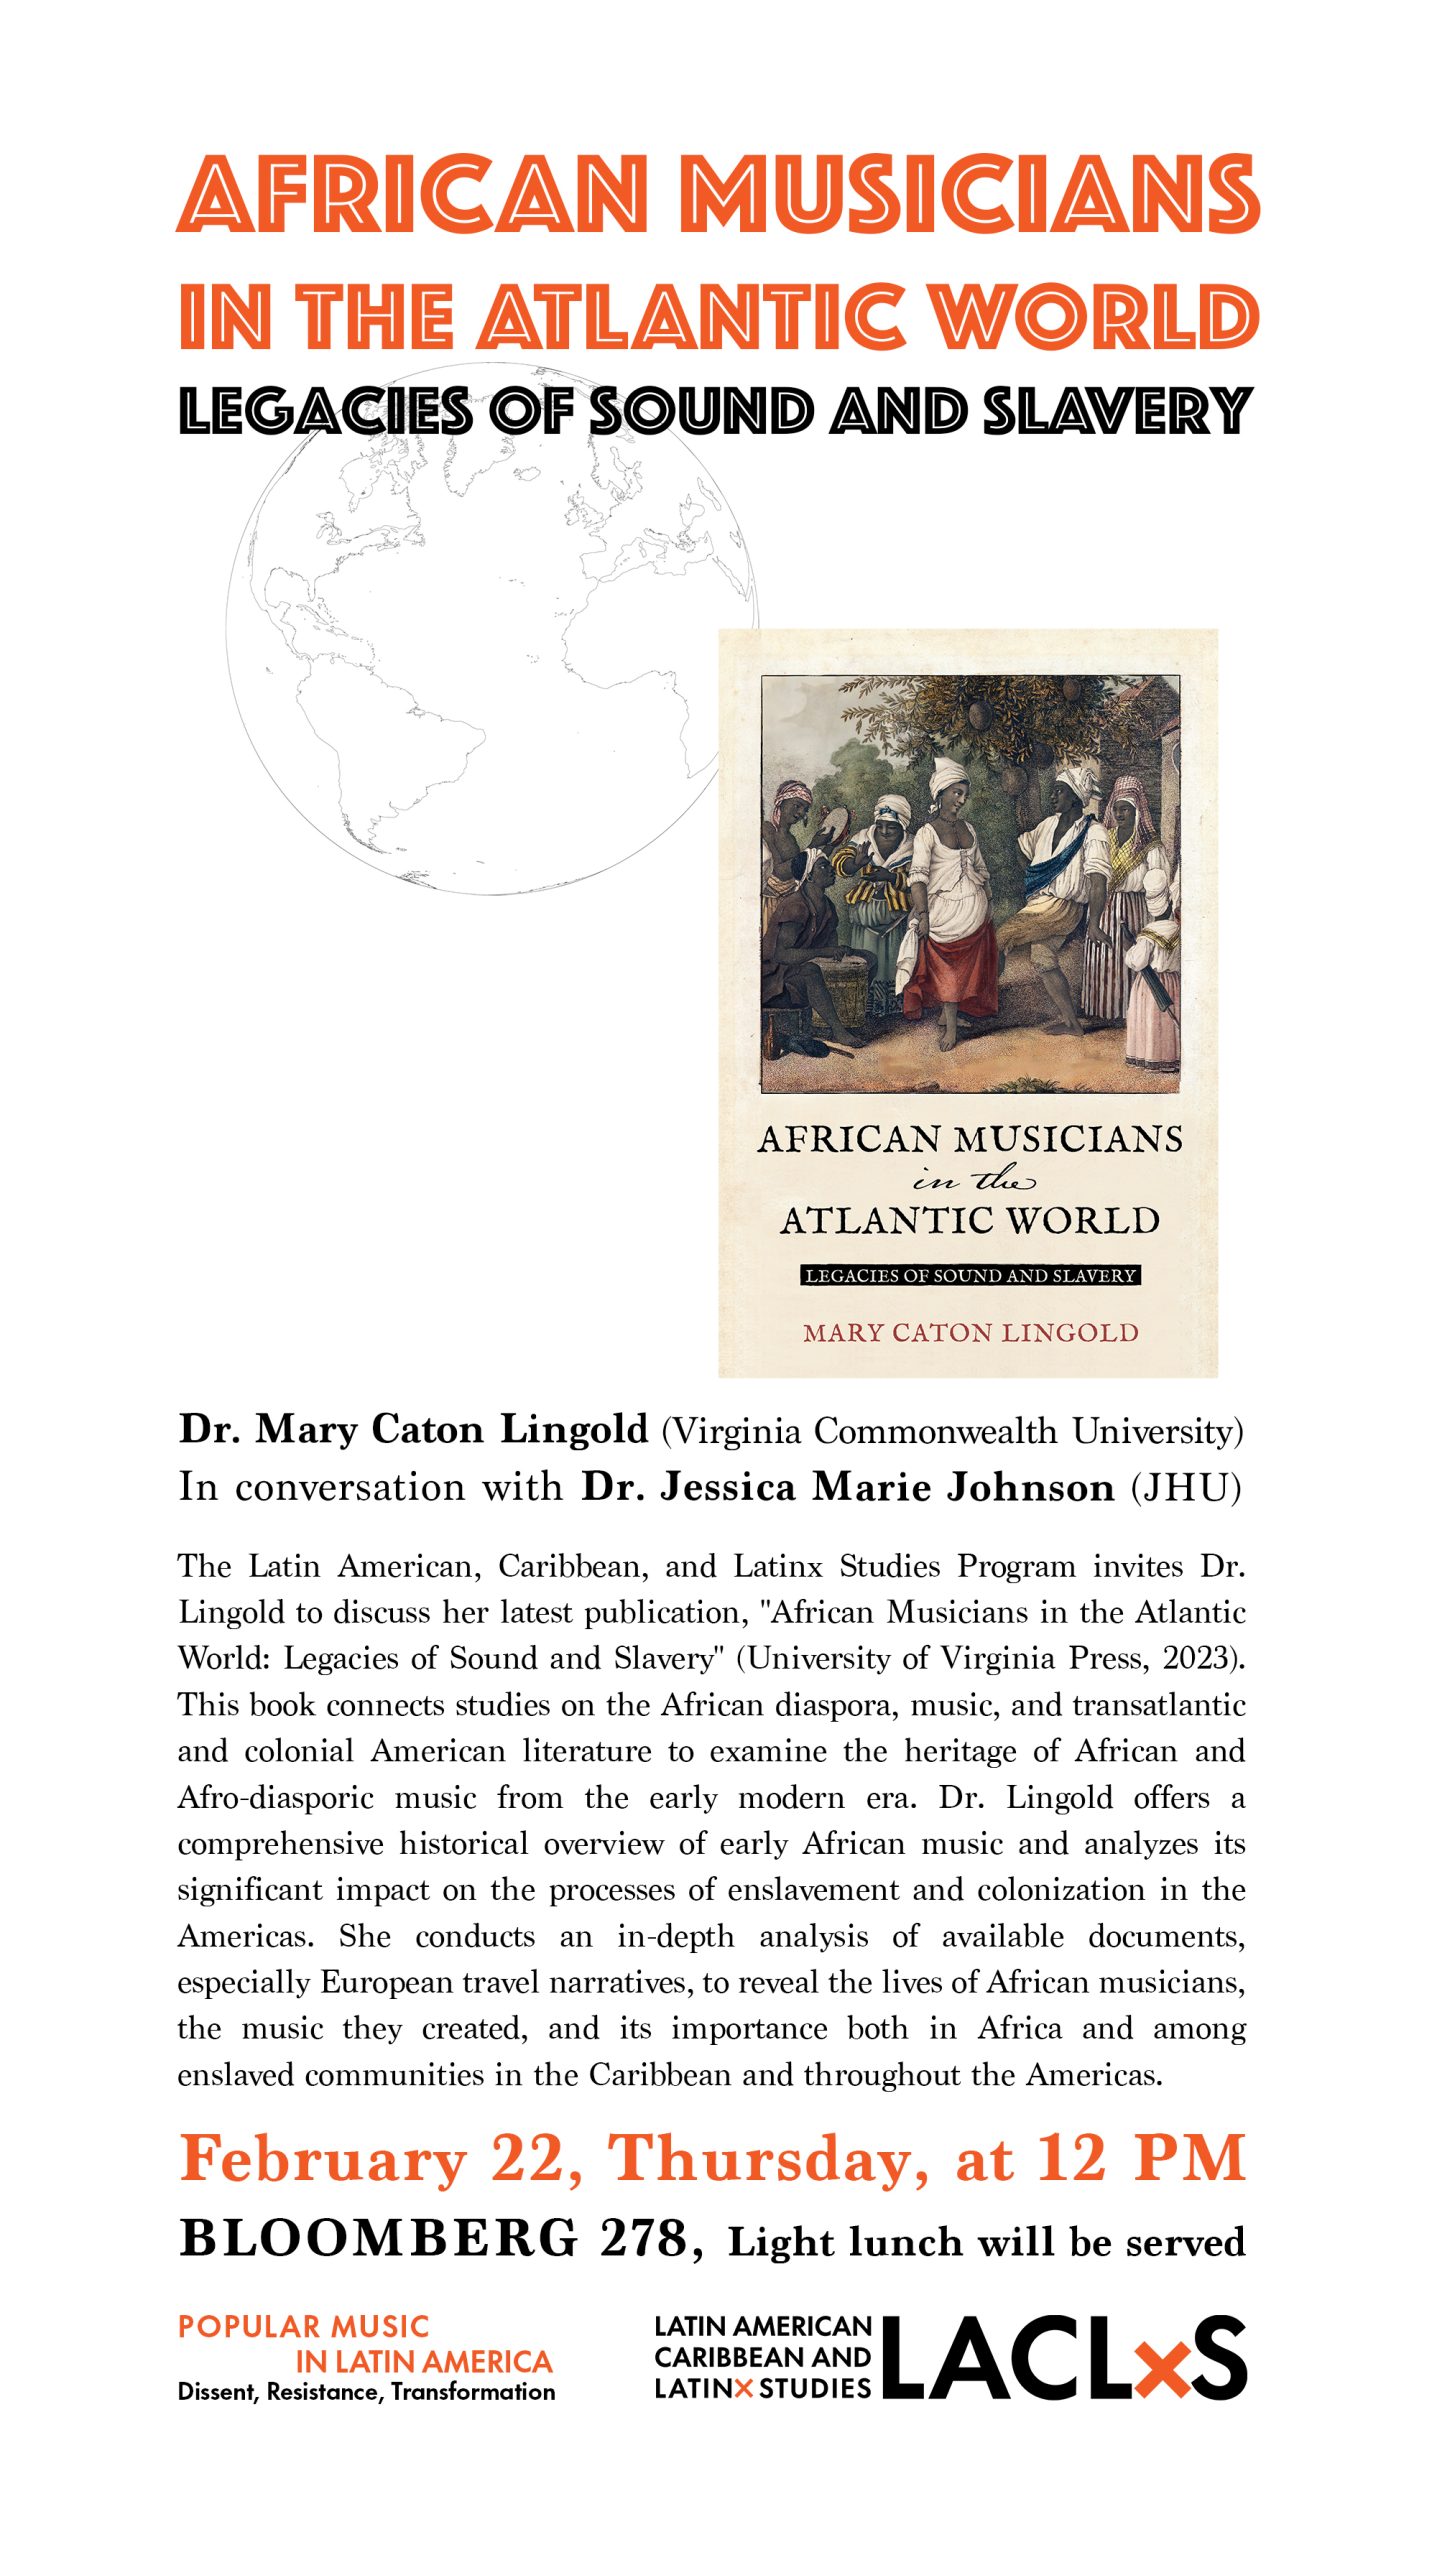 African Musicians in the Atlantic World: Legacies of Sound and Slavery, by Mary Caton Lingold